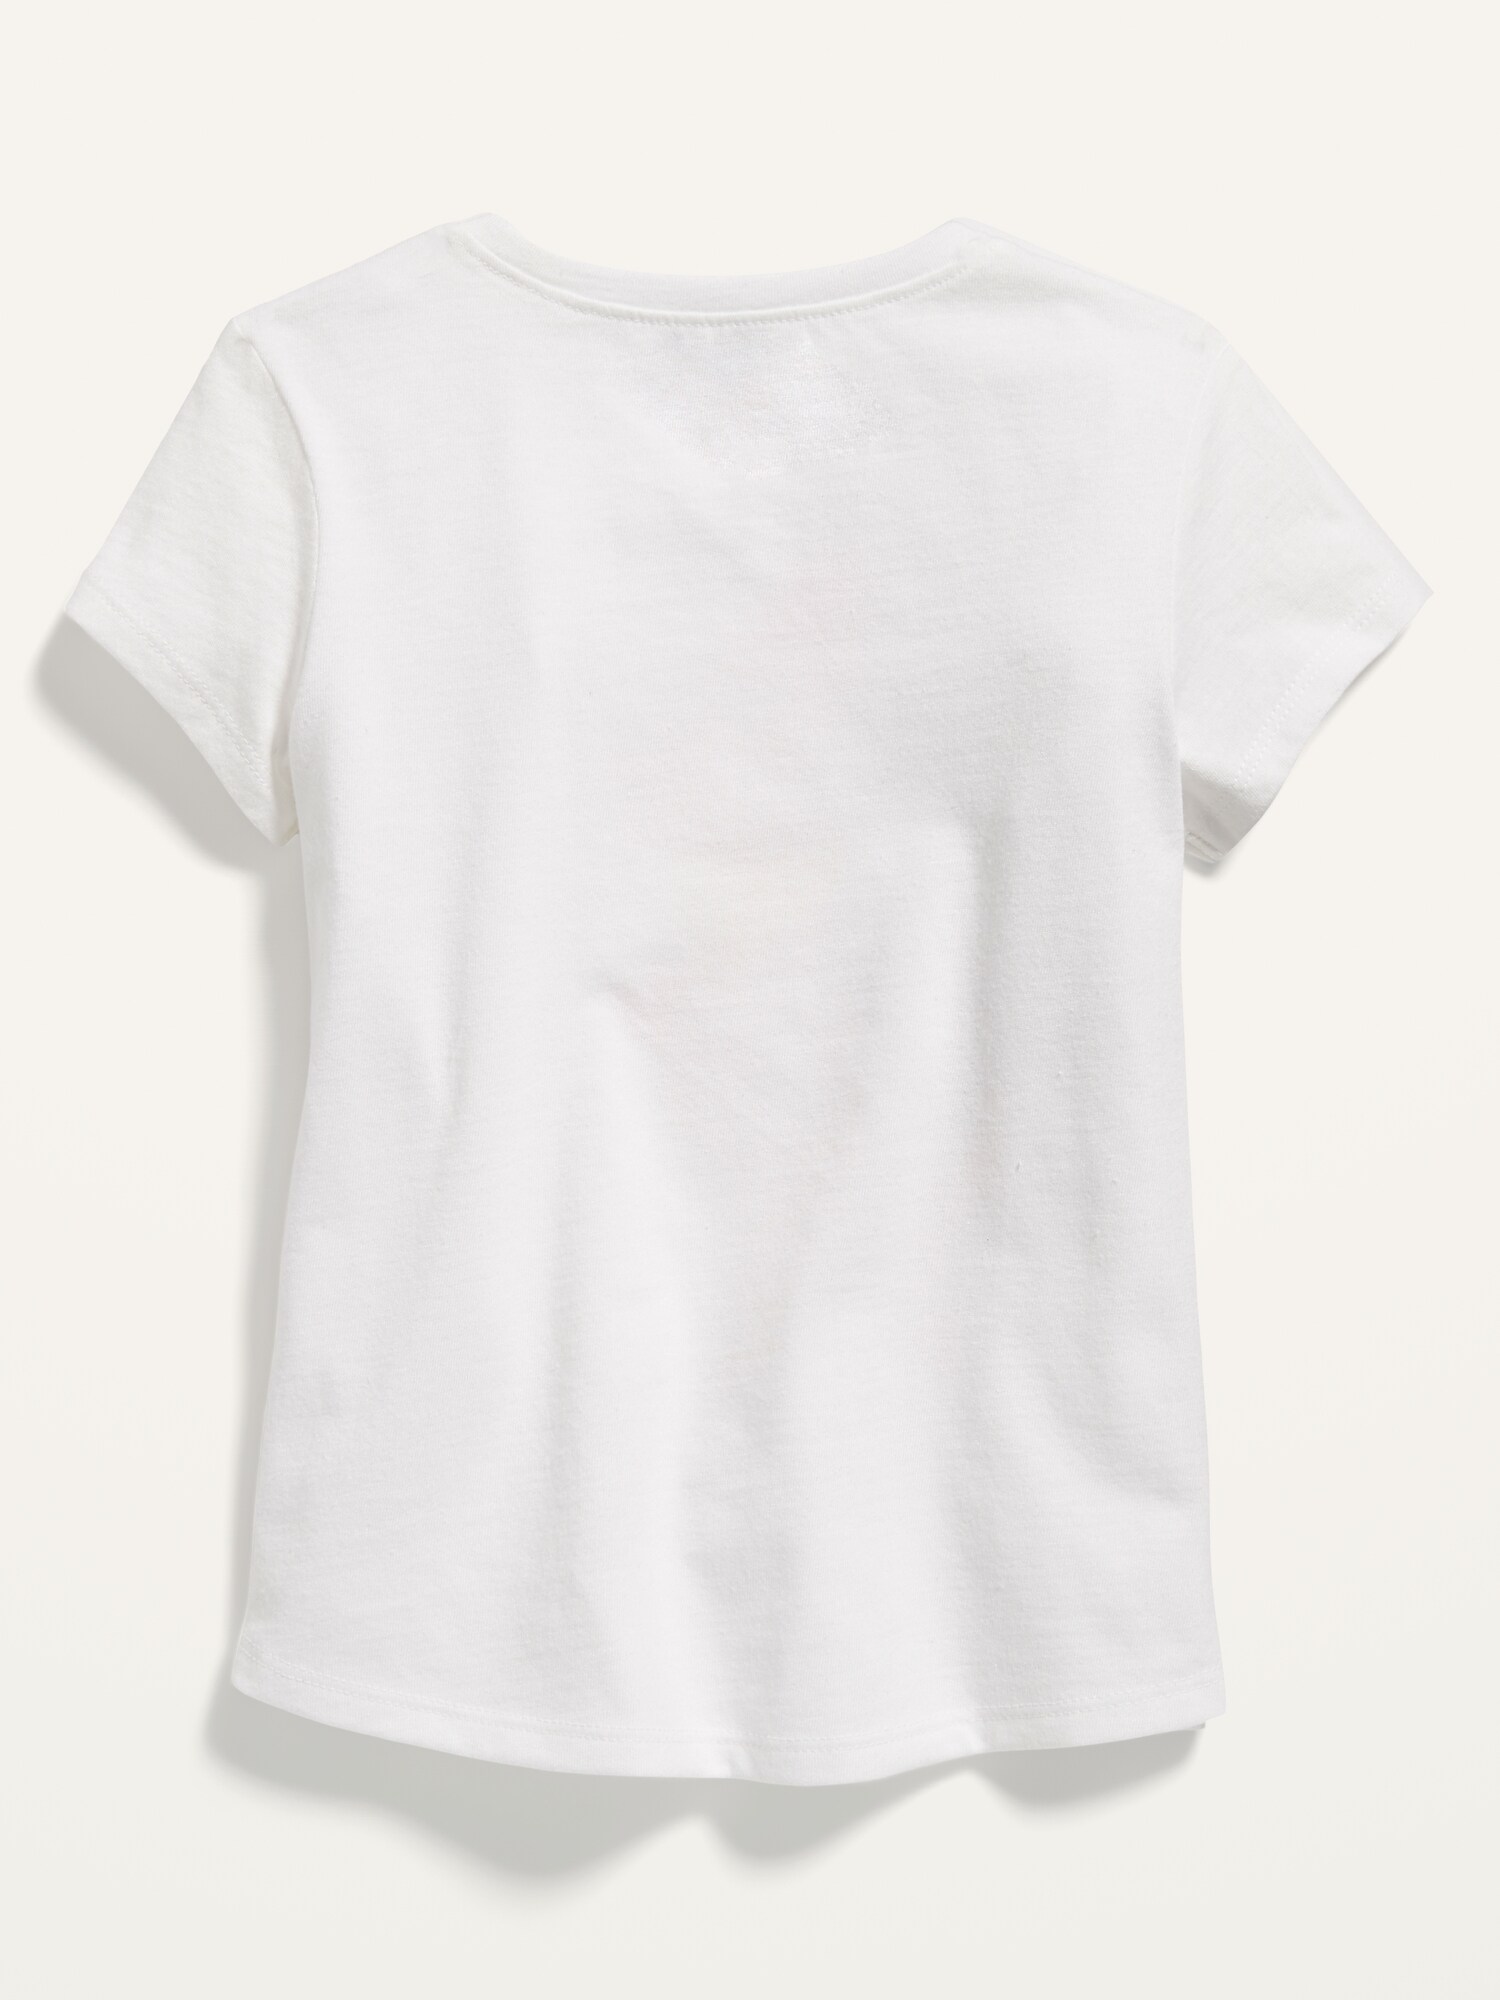 Graphic Short-Sleeve Tee For Toddler Girls | Old Navy